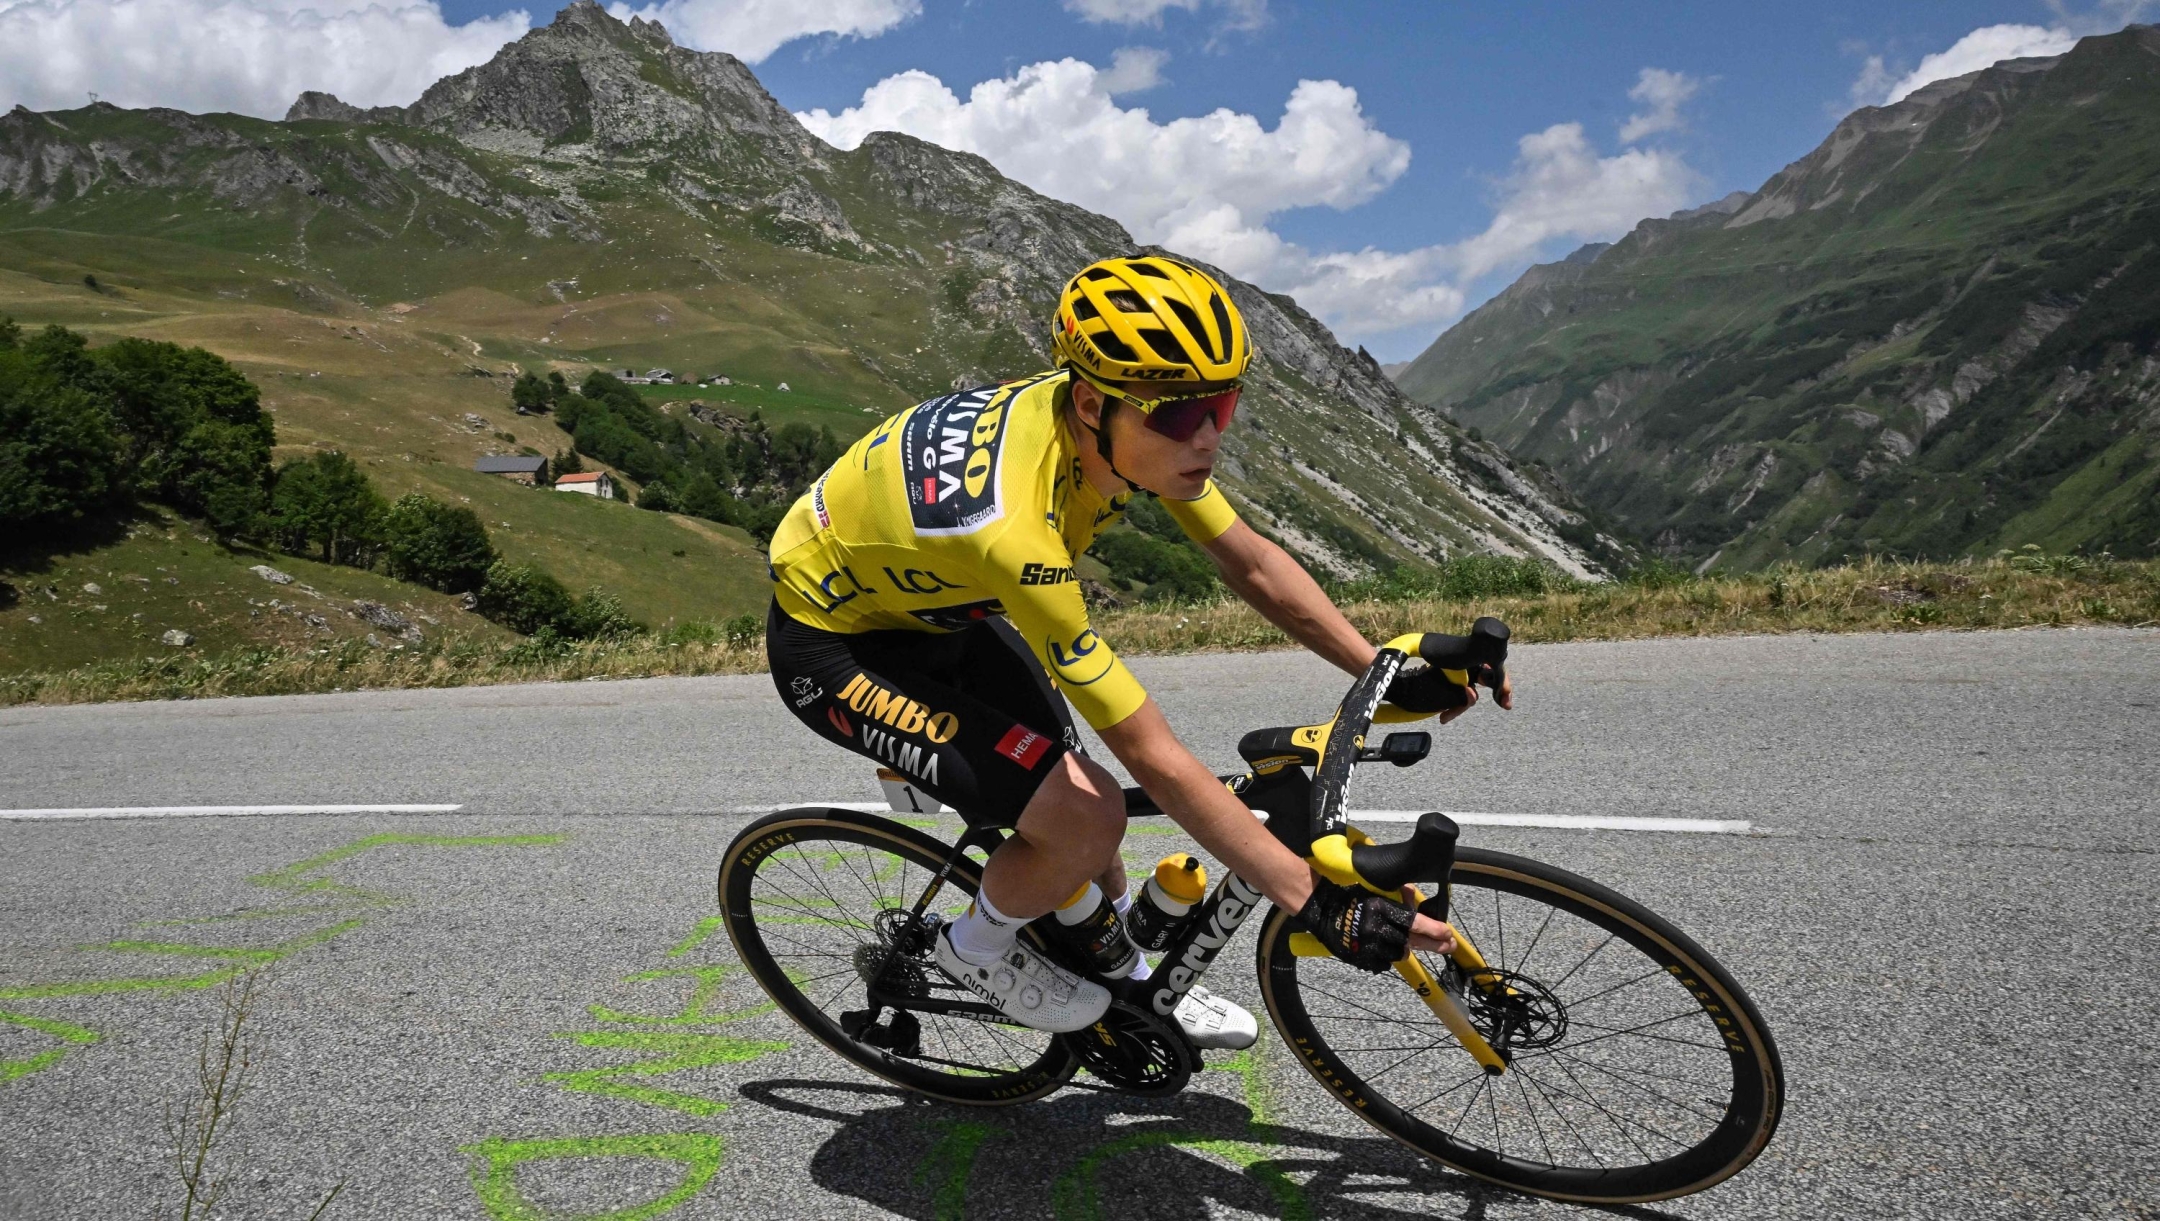 TOPSHOT - Jumbo-Visma's Danish rider Jonas Vingegaard wearing the overall leader's yellow jersey cycles in the descent of the Cormet de Roselend during the 17th stage of the 110th edition of the Tour de France cycling race, 166 km between Saint-Gervais Mont-Blanc and Courchevel, in the French Alps, on July 19, 2023. (Photo by Marco BERTORELLO / AFP)